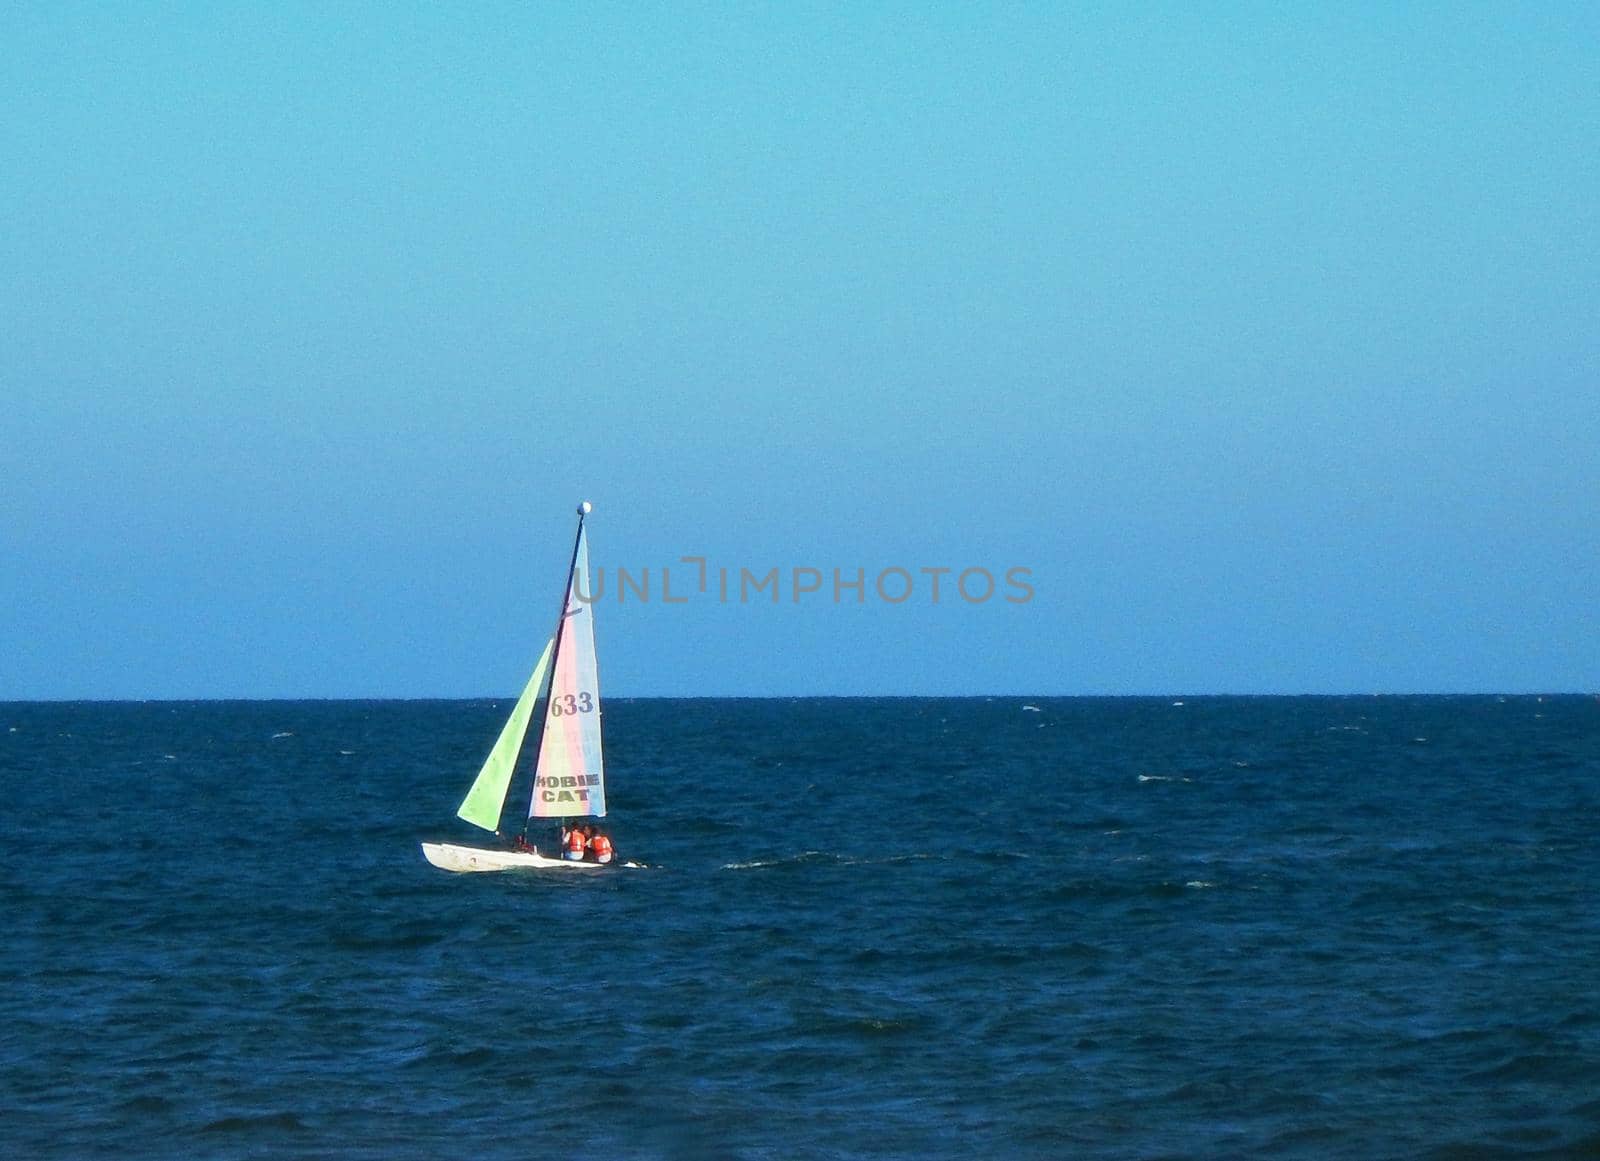 Sailboat in the blue sea with blue sky in the background